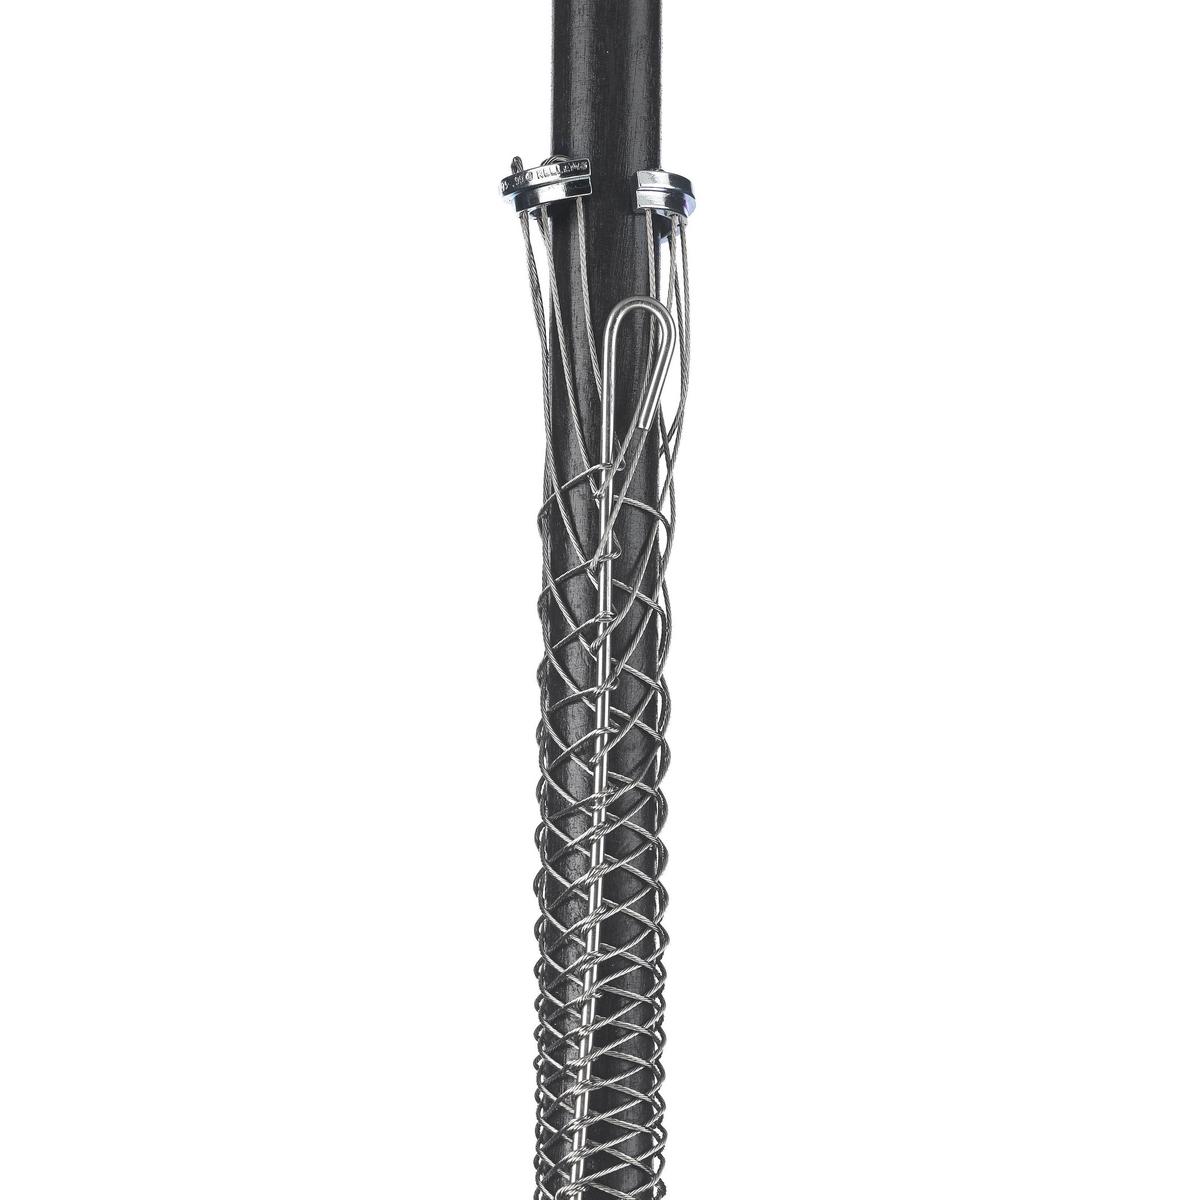 Hubbell 02213009 Conduit Riser Support Grips, Single Weave, Split Mesh, Rod Closing, 1.50" Conduit, Tin-Coated Bronze, 1.00-1.24"  ; Suitable for standard rigid metal conduit and schedule 40 rigid PVC conduit only ; Pemanently fastened to support ring ; For permanent supp